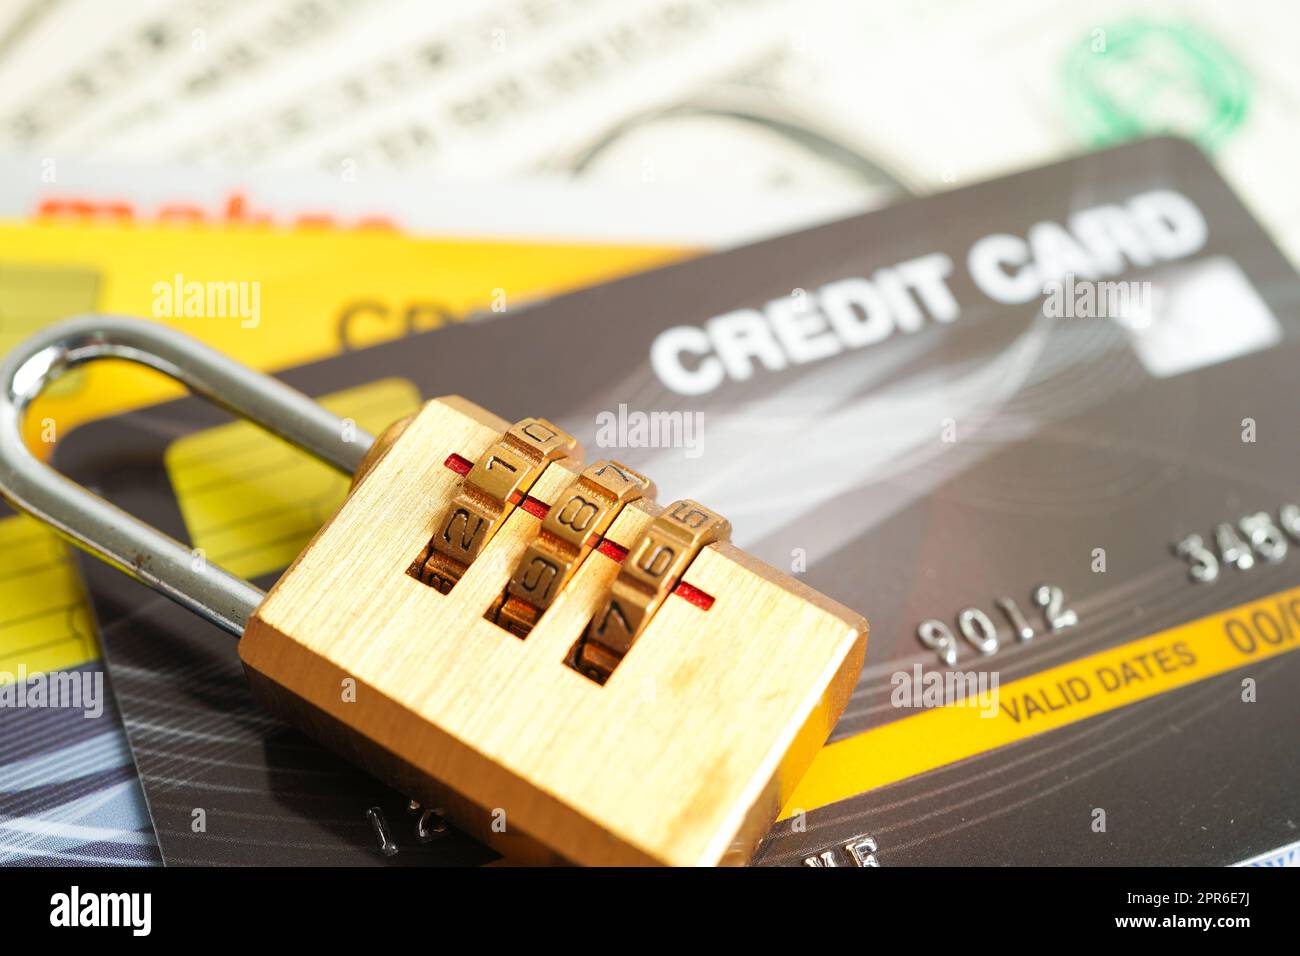 Credit card for online shopping, security finance business concept. Stock Photo